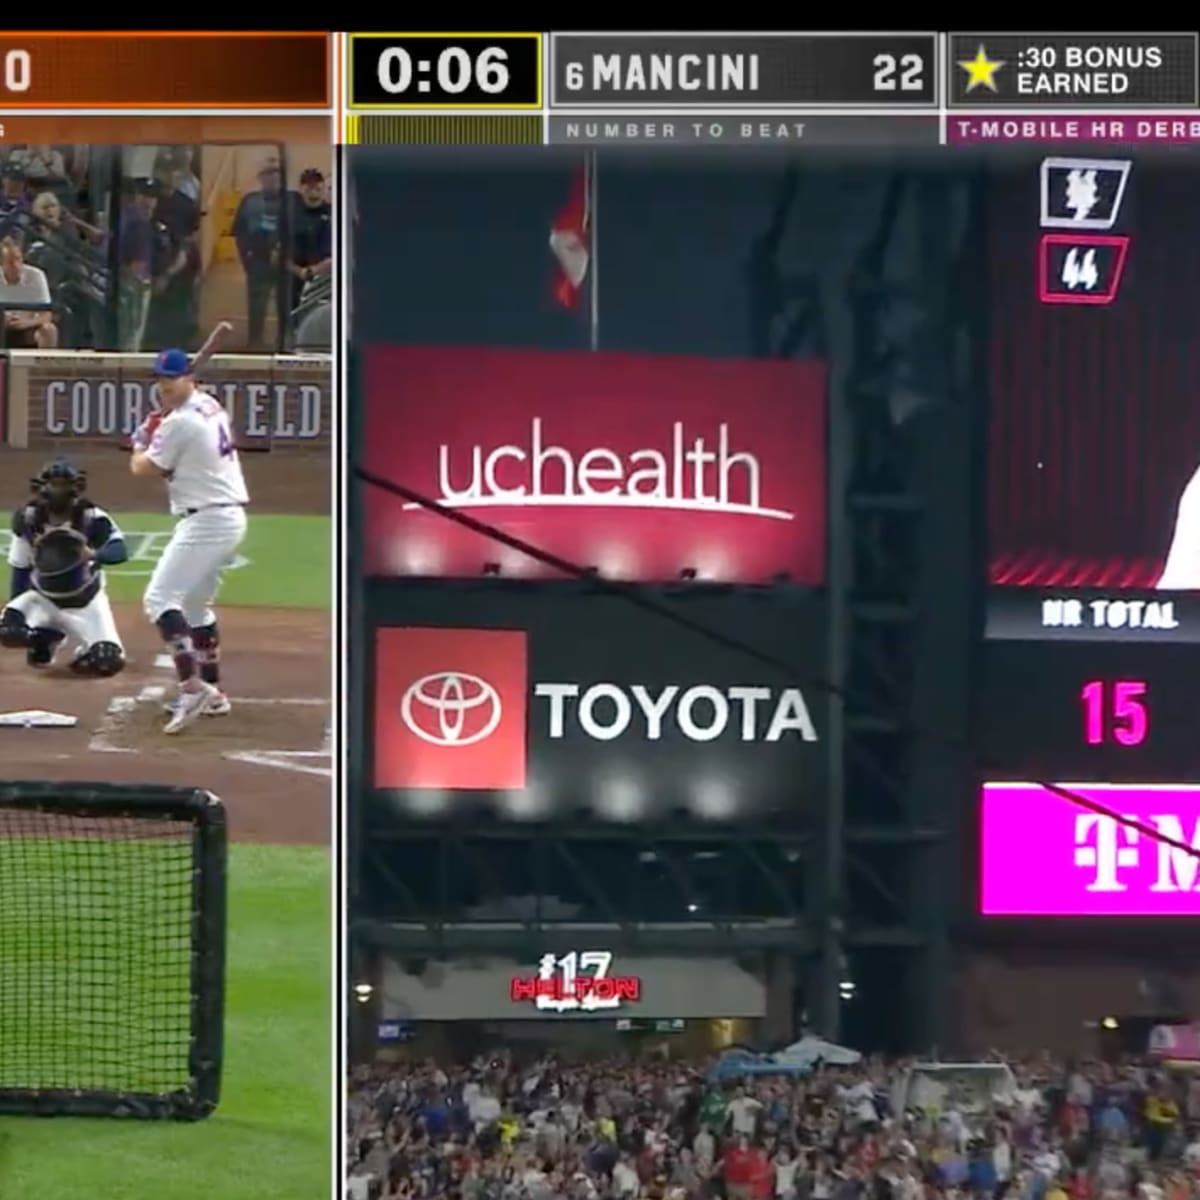 Home Run Derby ESPNs split screen not the problem with broadcast